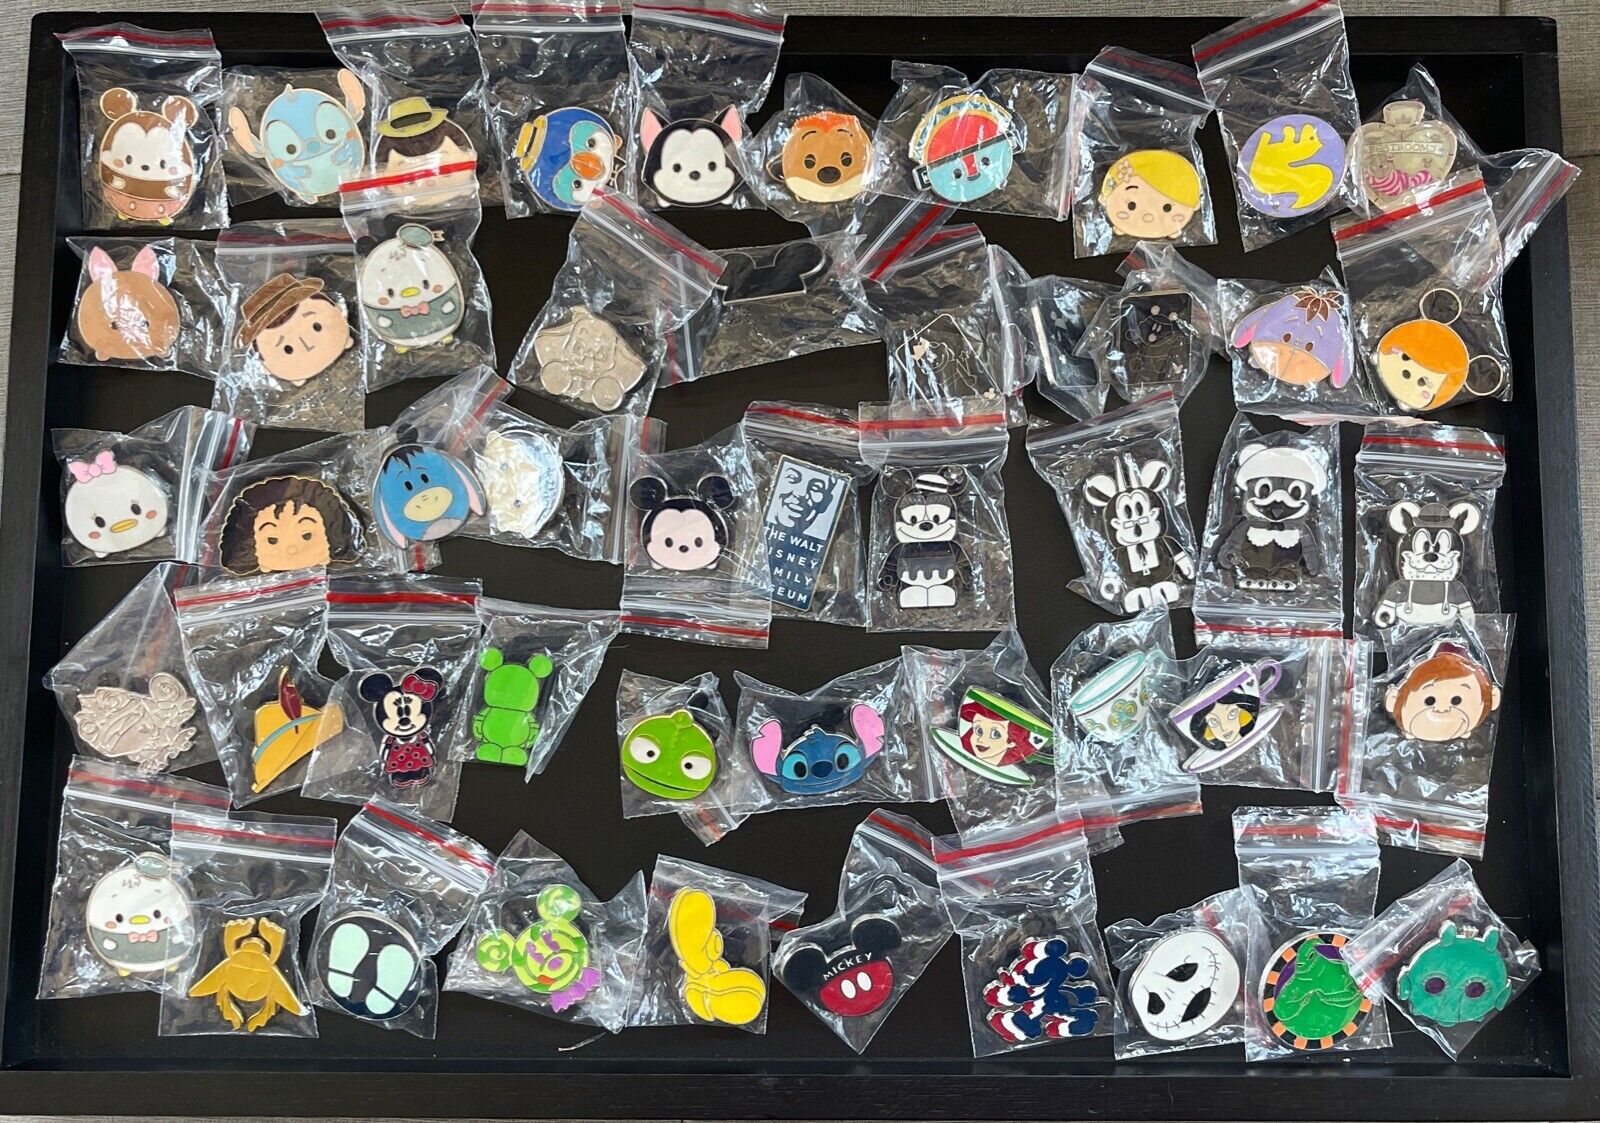 Disney Trading Pins lot of 50 - You Get Exact Pins In Pictures - No Duplicates